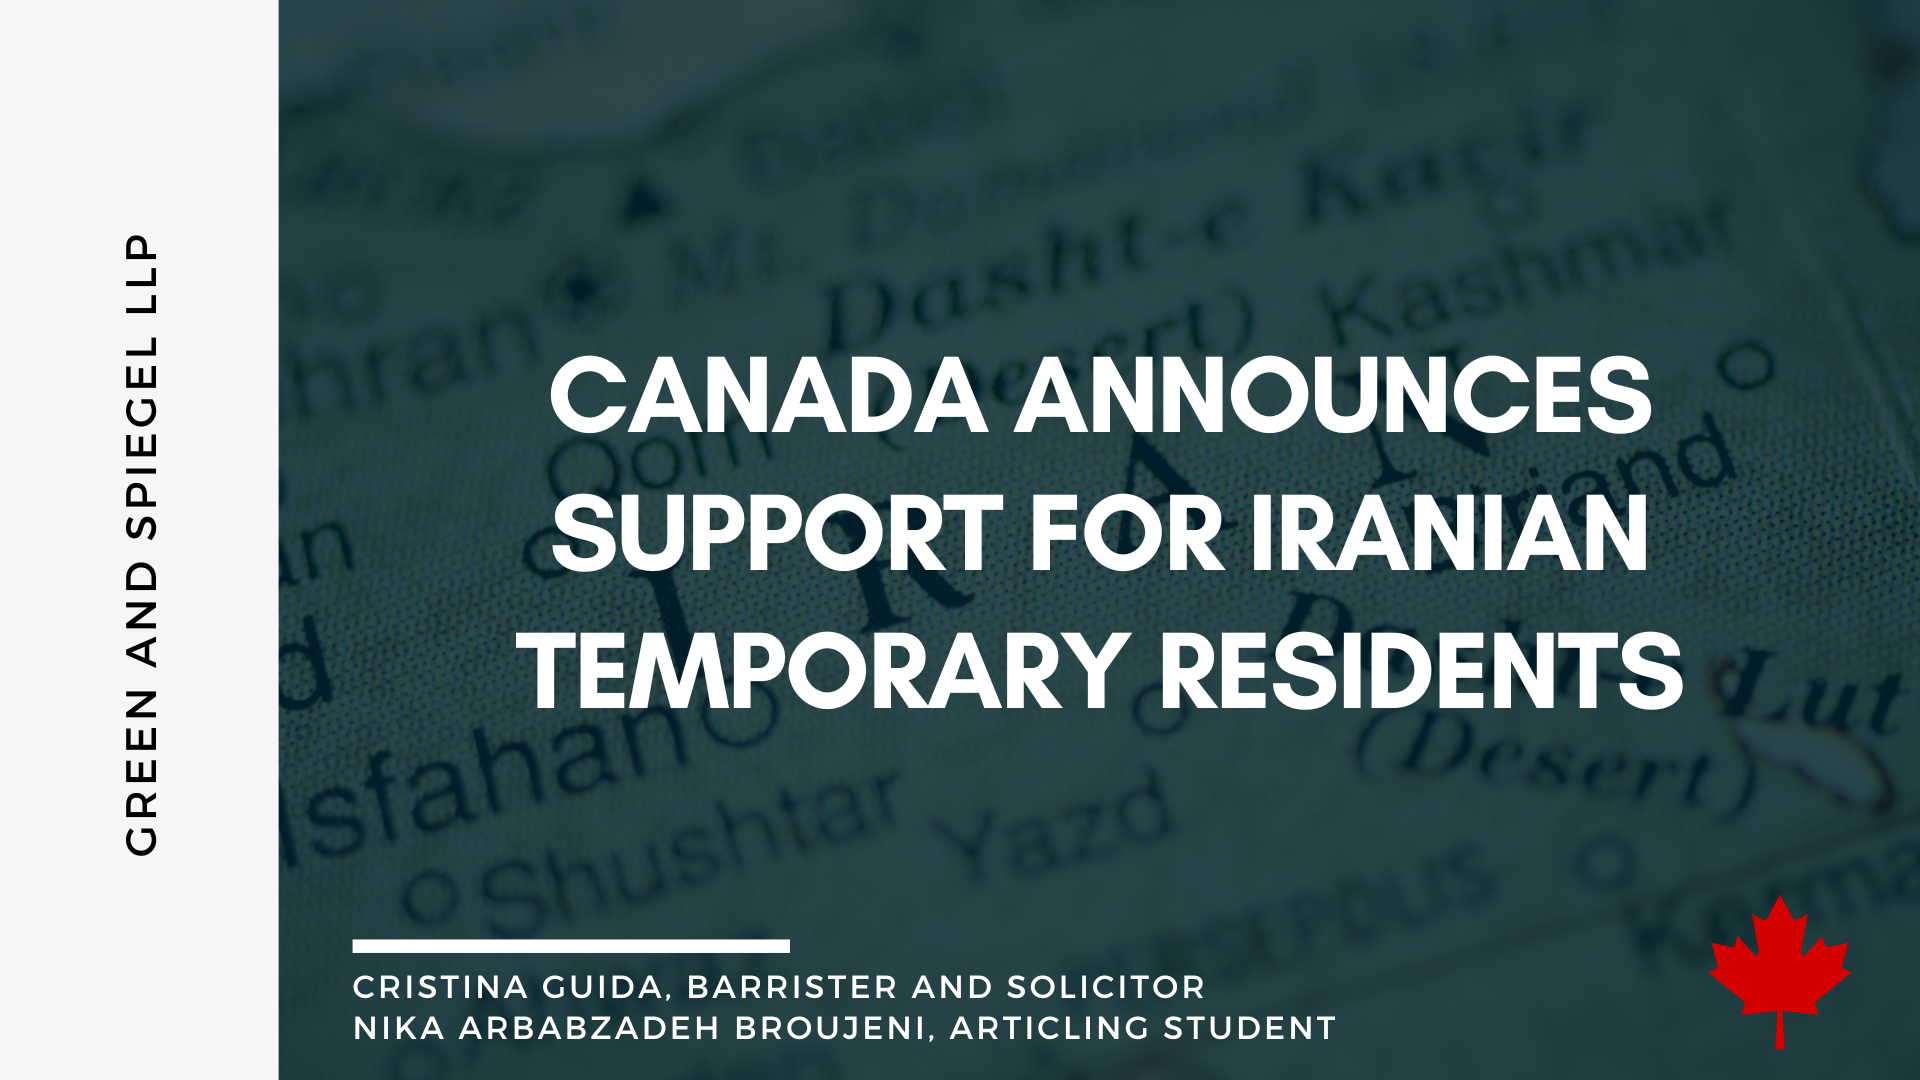 CANADA ANNOUNCES SUPPORT FOR IRANIAN TEMPORARY RESIDENTS
